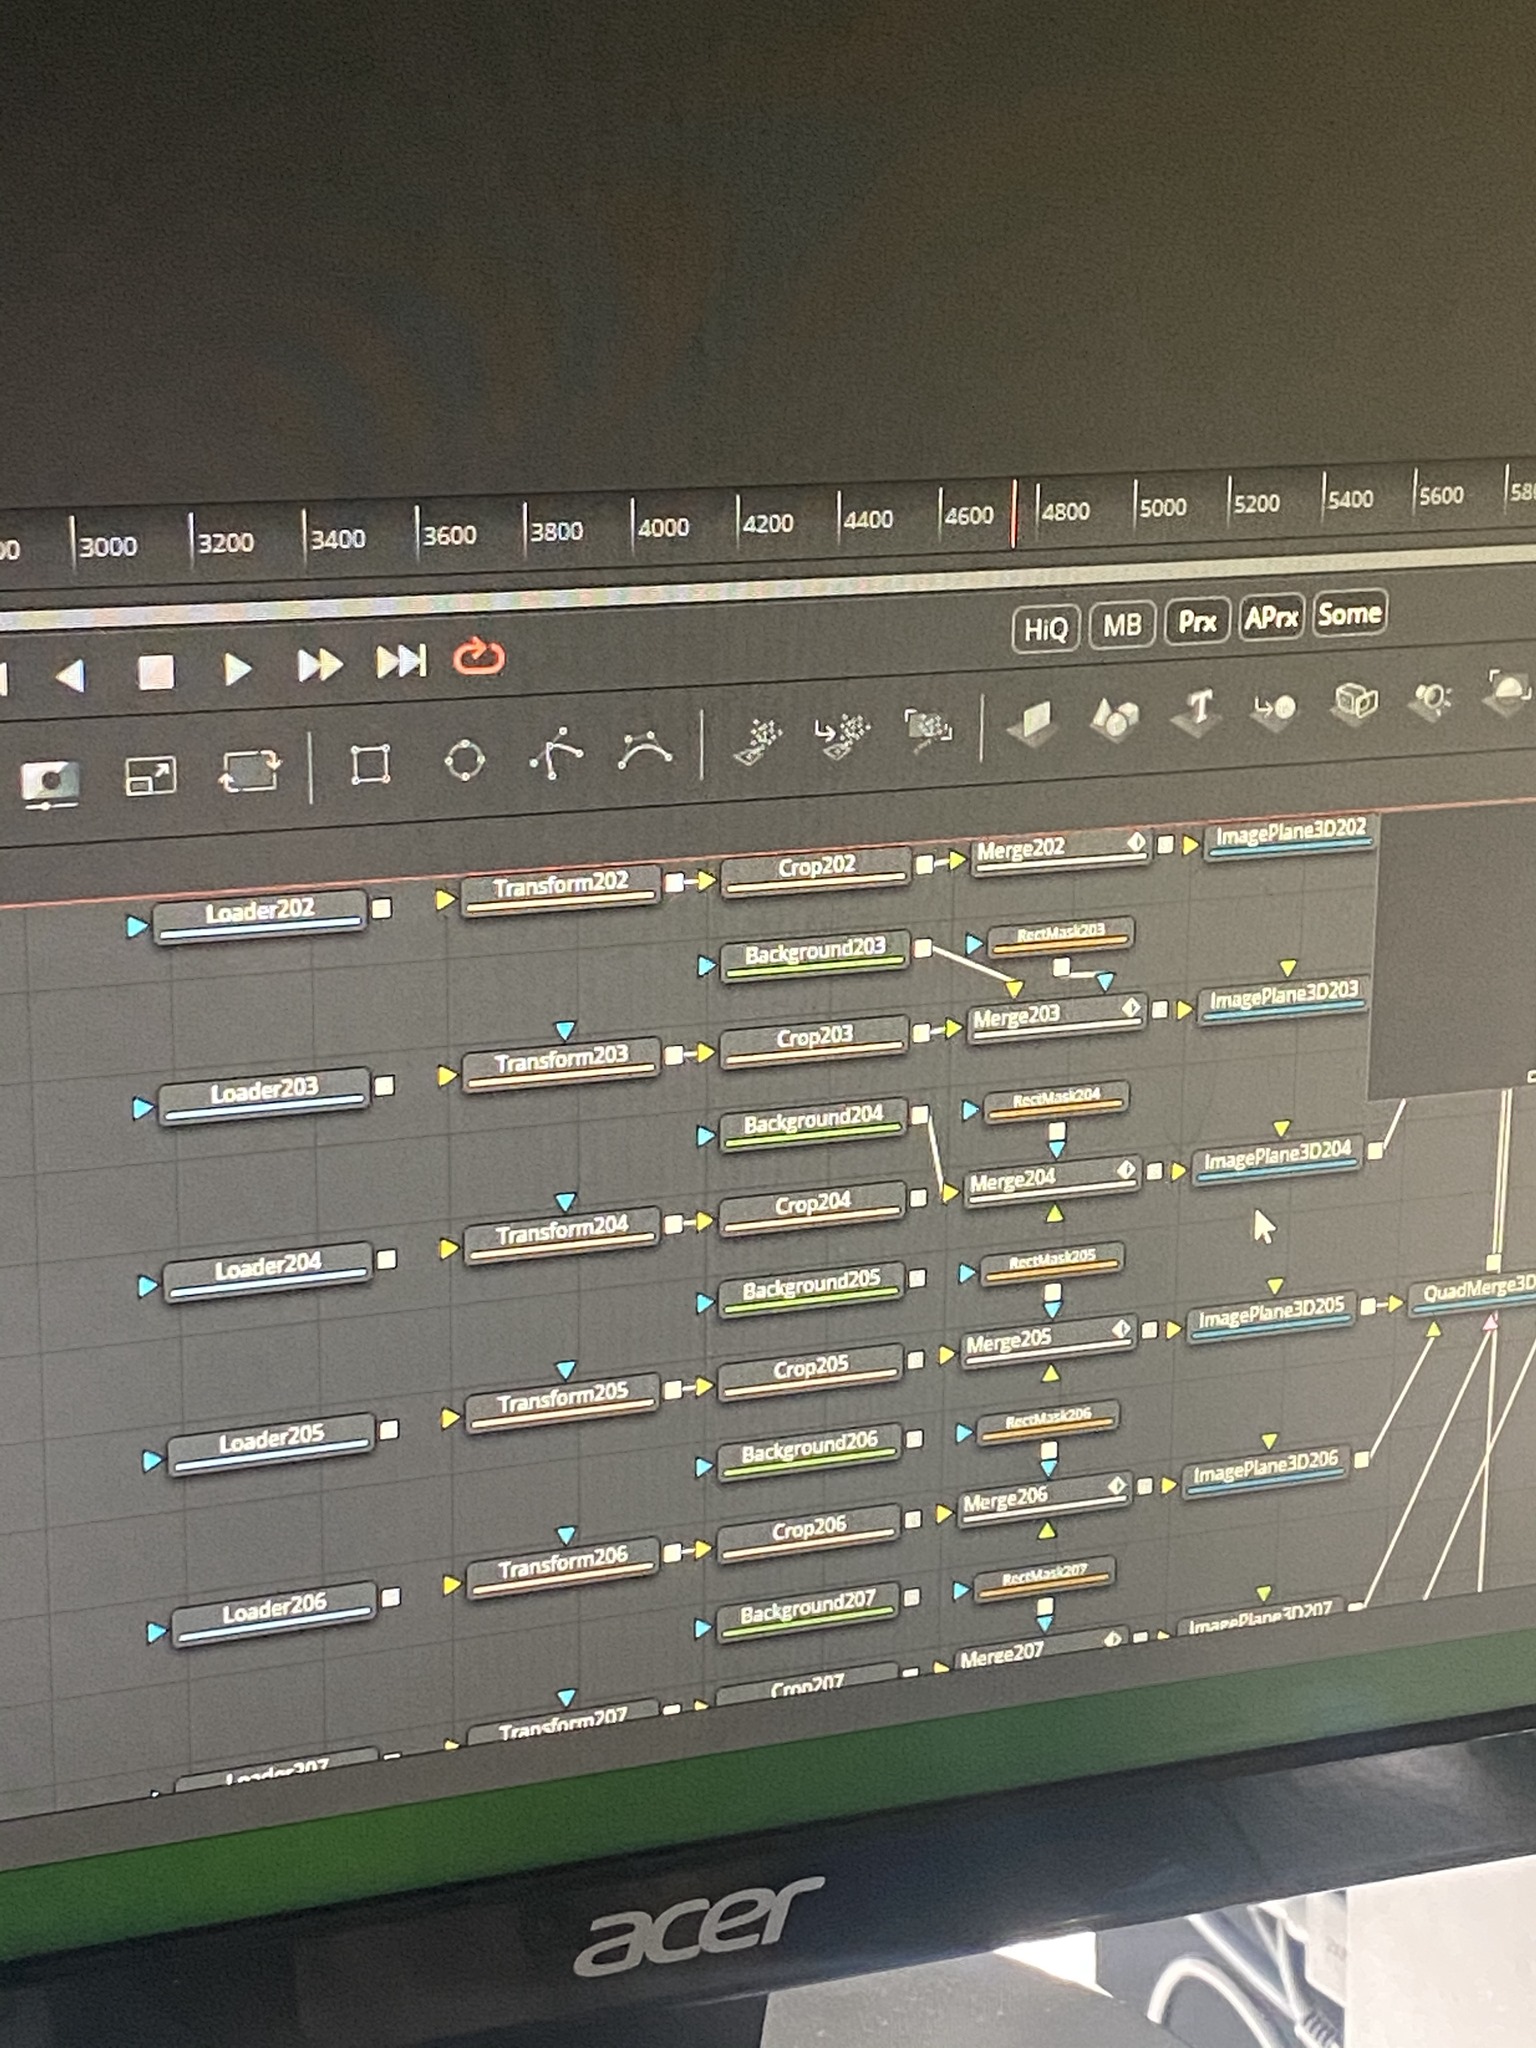 Fusion node tree under construction for compositing musician videos with the candles